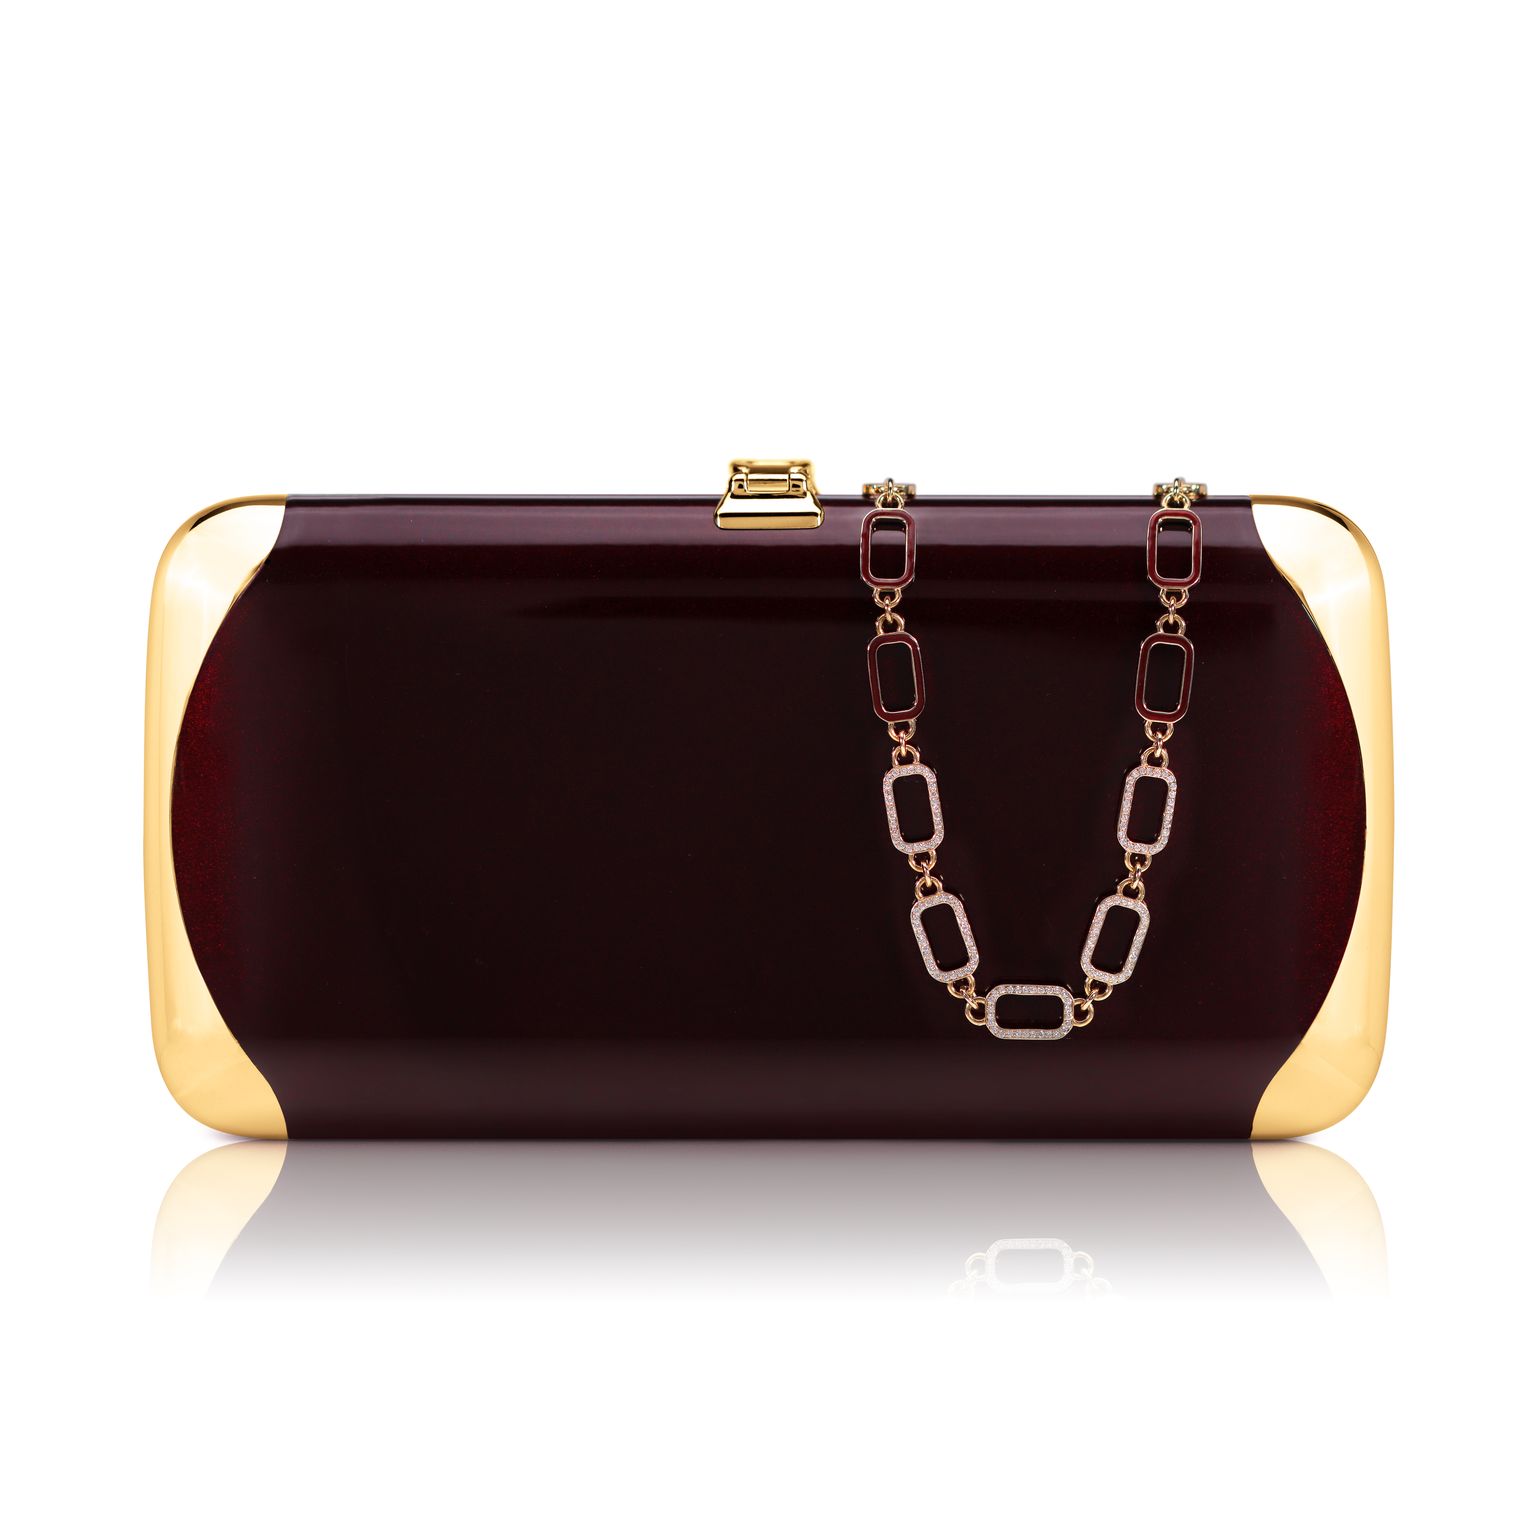 5-things-to-buy-in-the-month-of-March-misahara-finley-clutch-a-collaboration-with-jeffrey-levinson